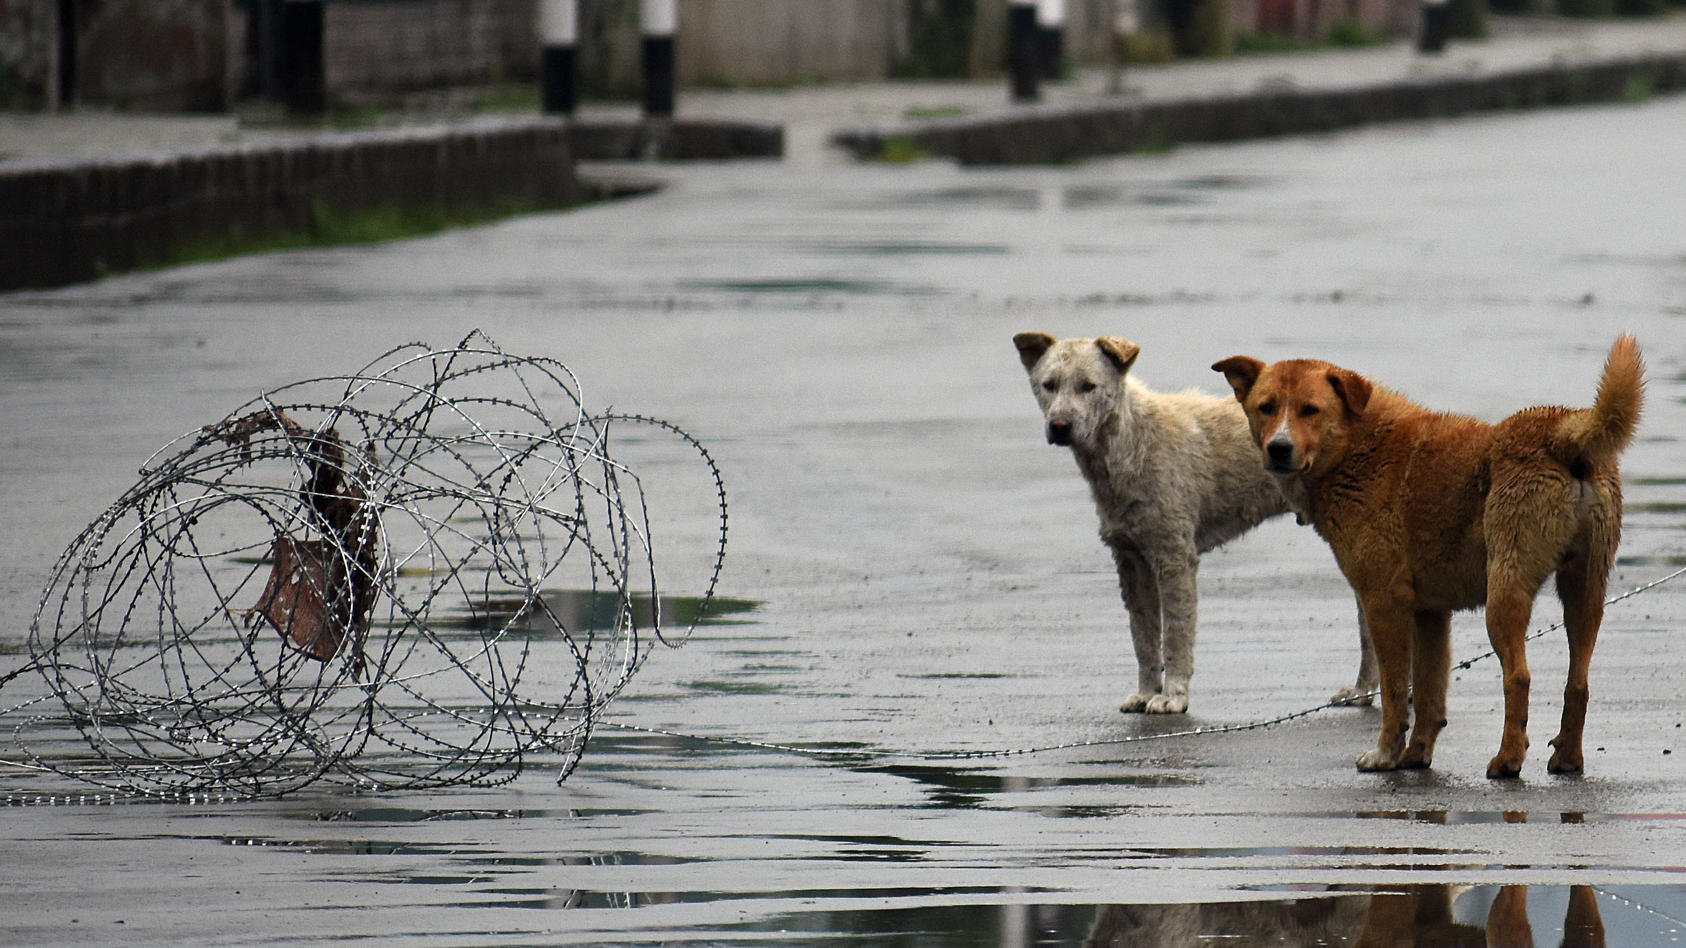 SRINAGAR, KASHMIR, INDIA - MAY 31: Stray dogs are seen on the main road in commercial hub of Srinagar, Kashmir on May 31, 2020. India authorities extended the lockdown in containment zones till June 30 and said all economic activities can restart in 